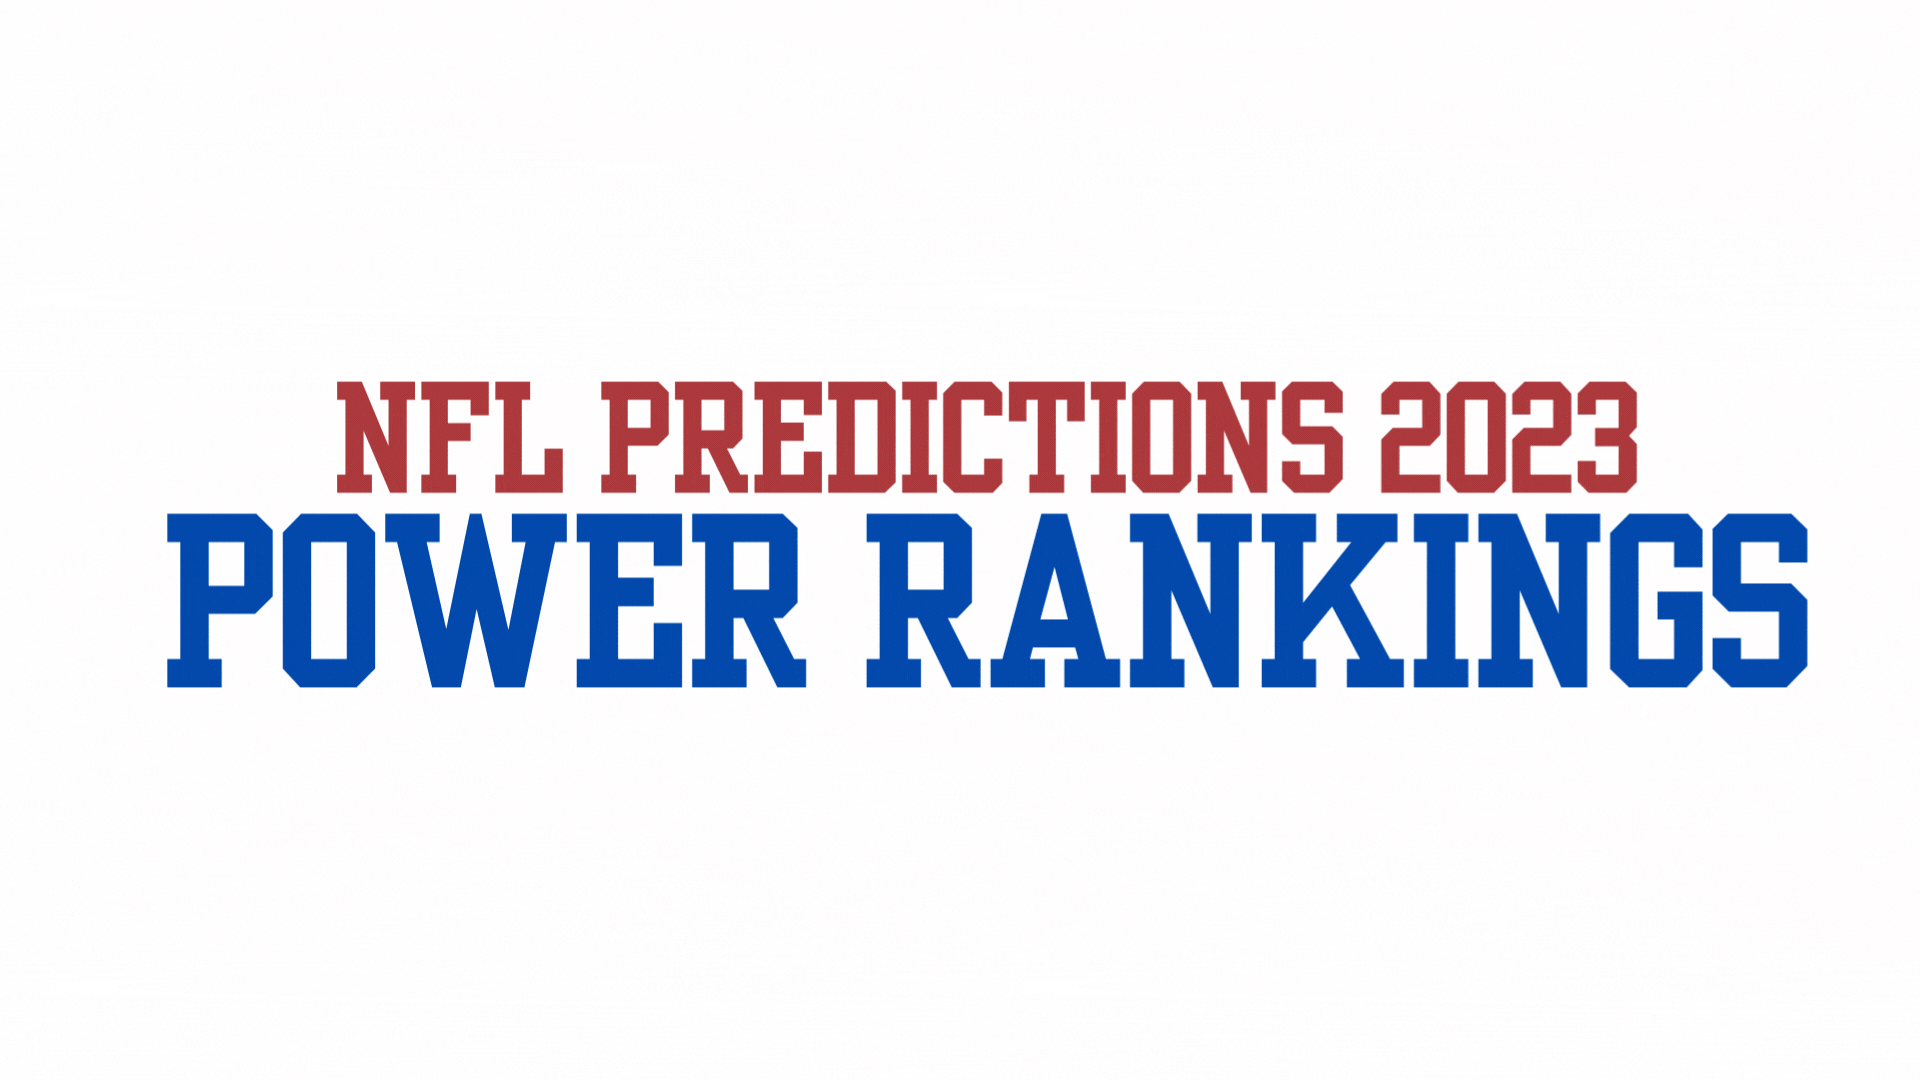 Our NFL Power Rankings for Week 3 feature the San Francisco 49ers in the top spot, with the Kansas City Chiefs close behind...